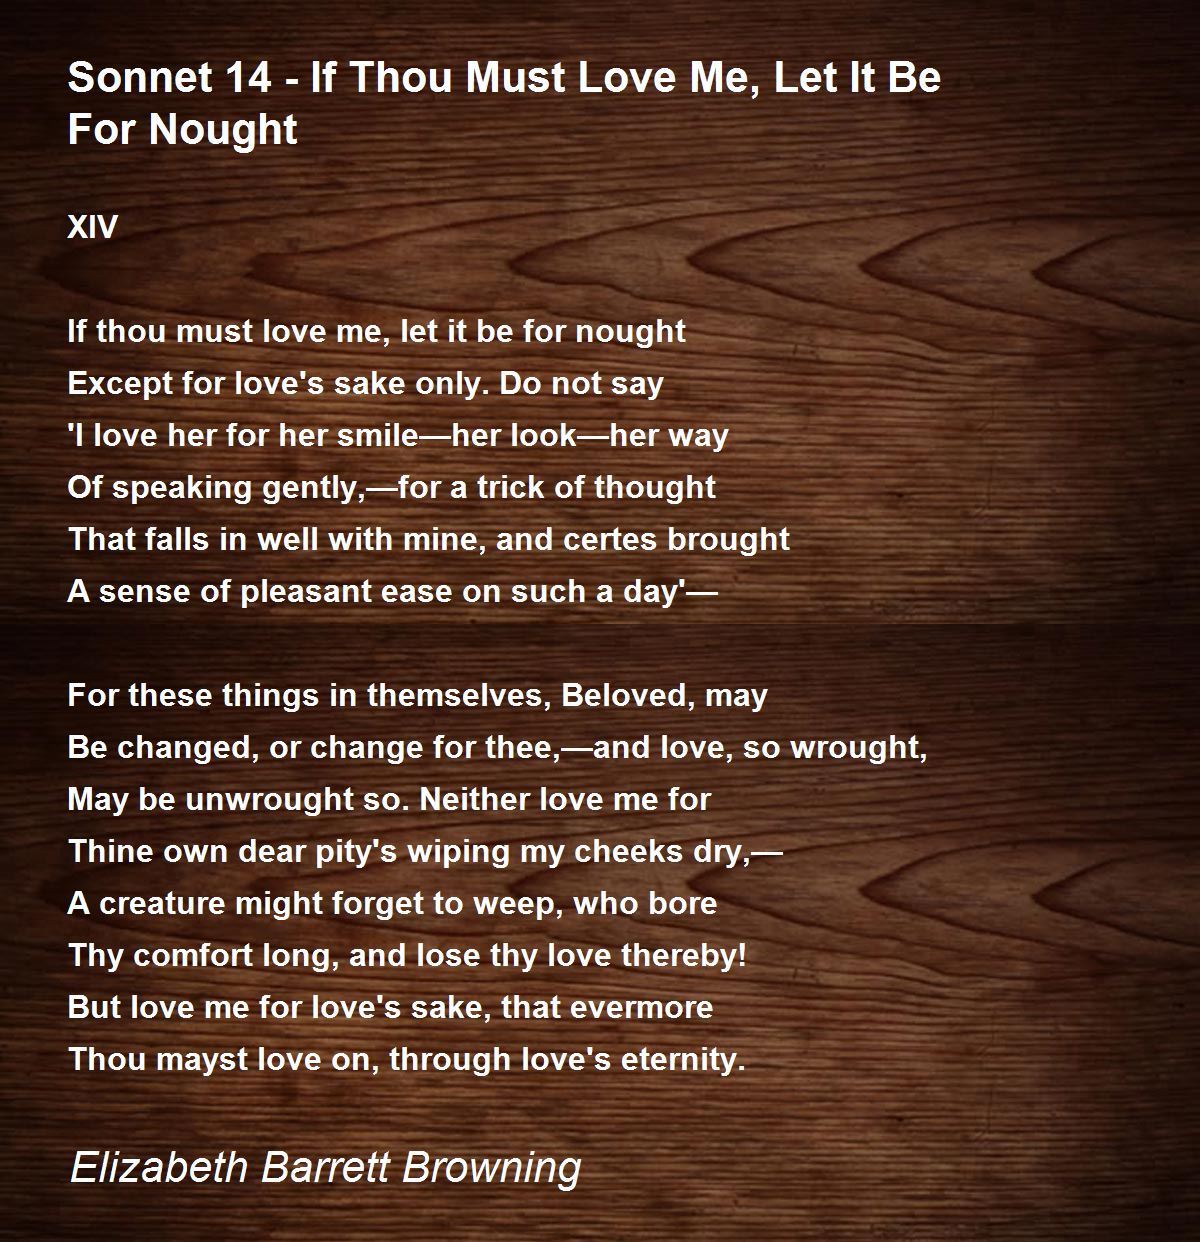 sonnet-14-if-thou-must-love-me-let-it-be-for-nou.jpg